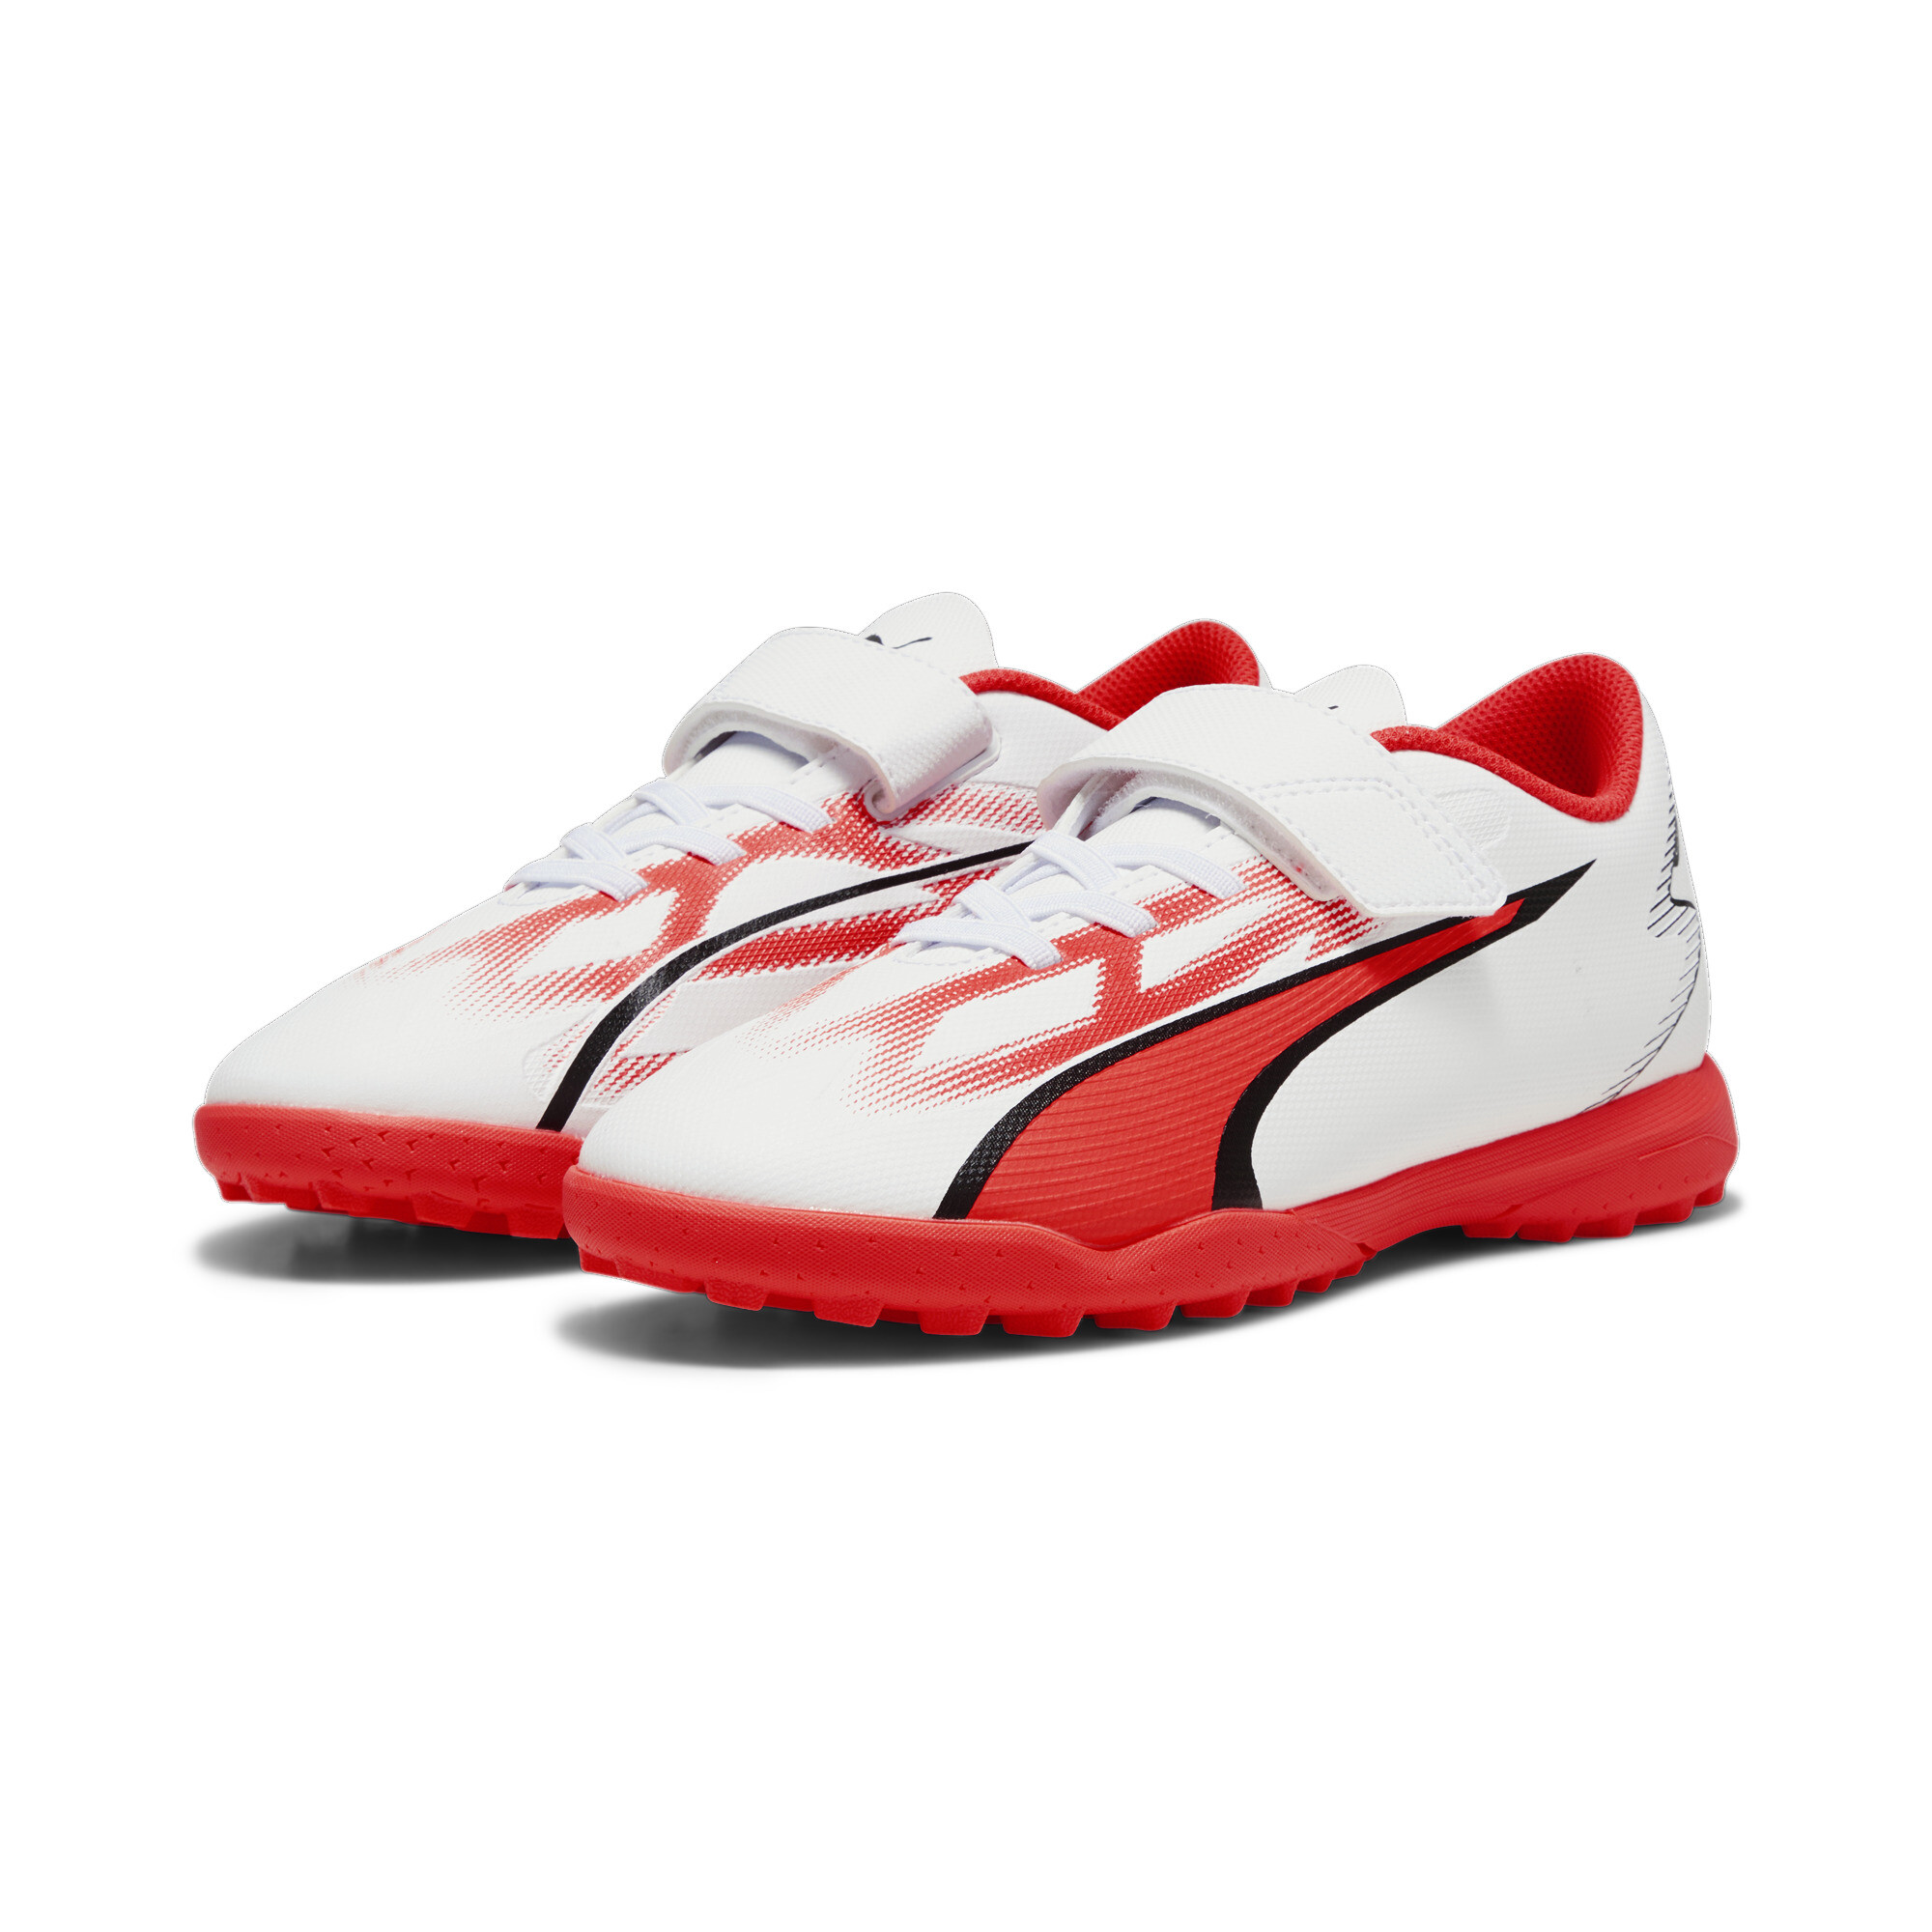 PUMA ULTRA PLAY TT Youth Football Boots In White, Size EU 35.5